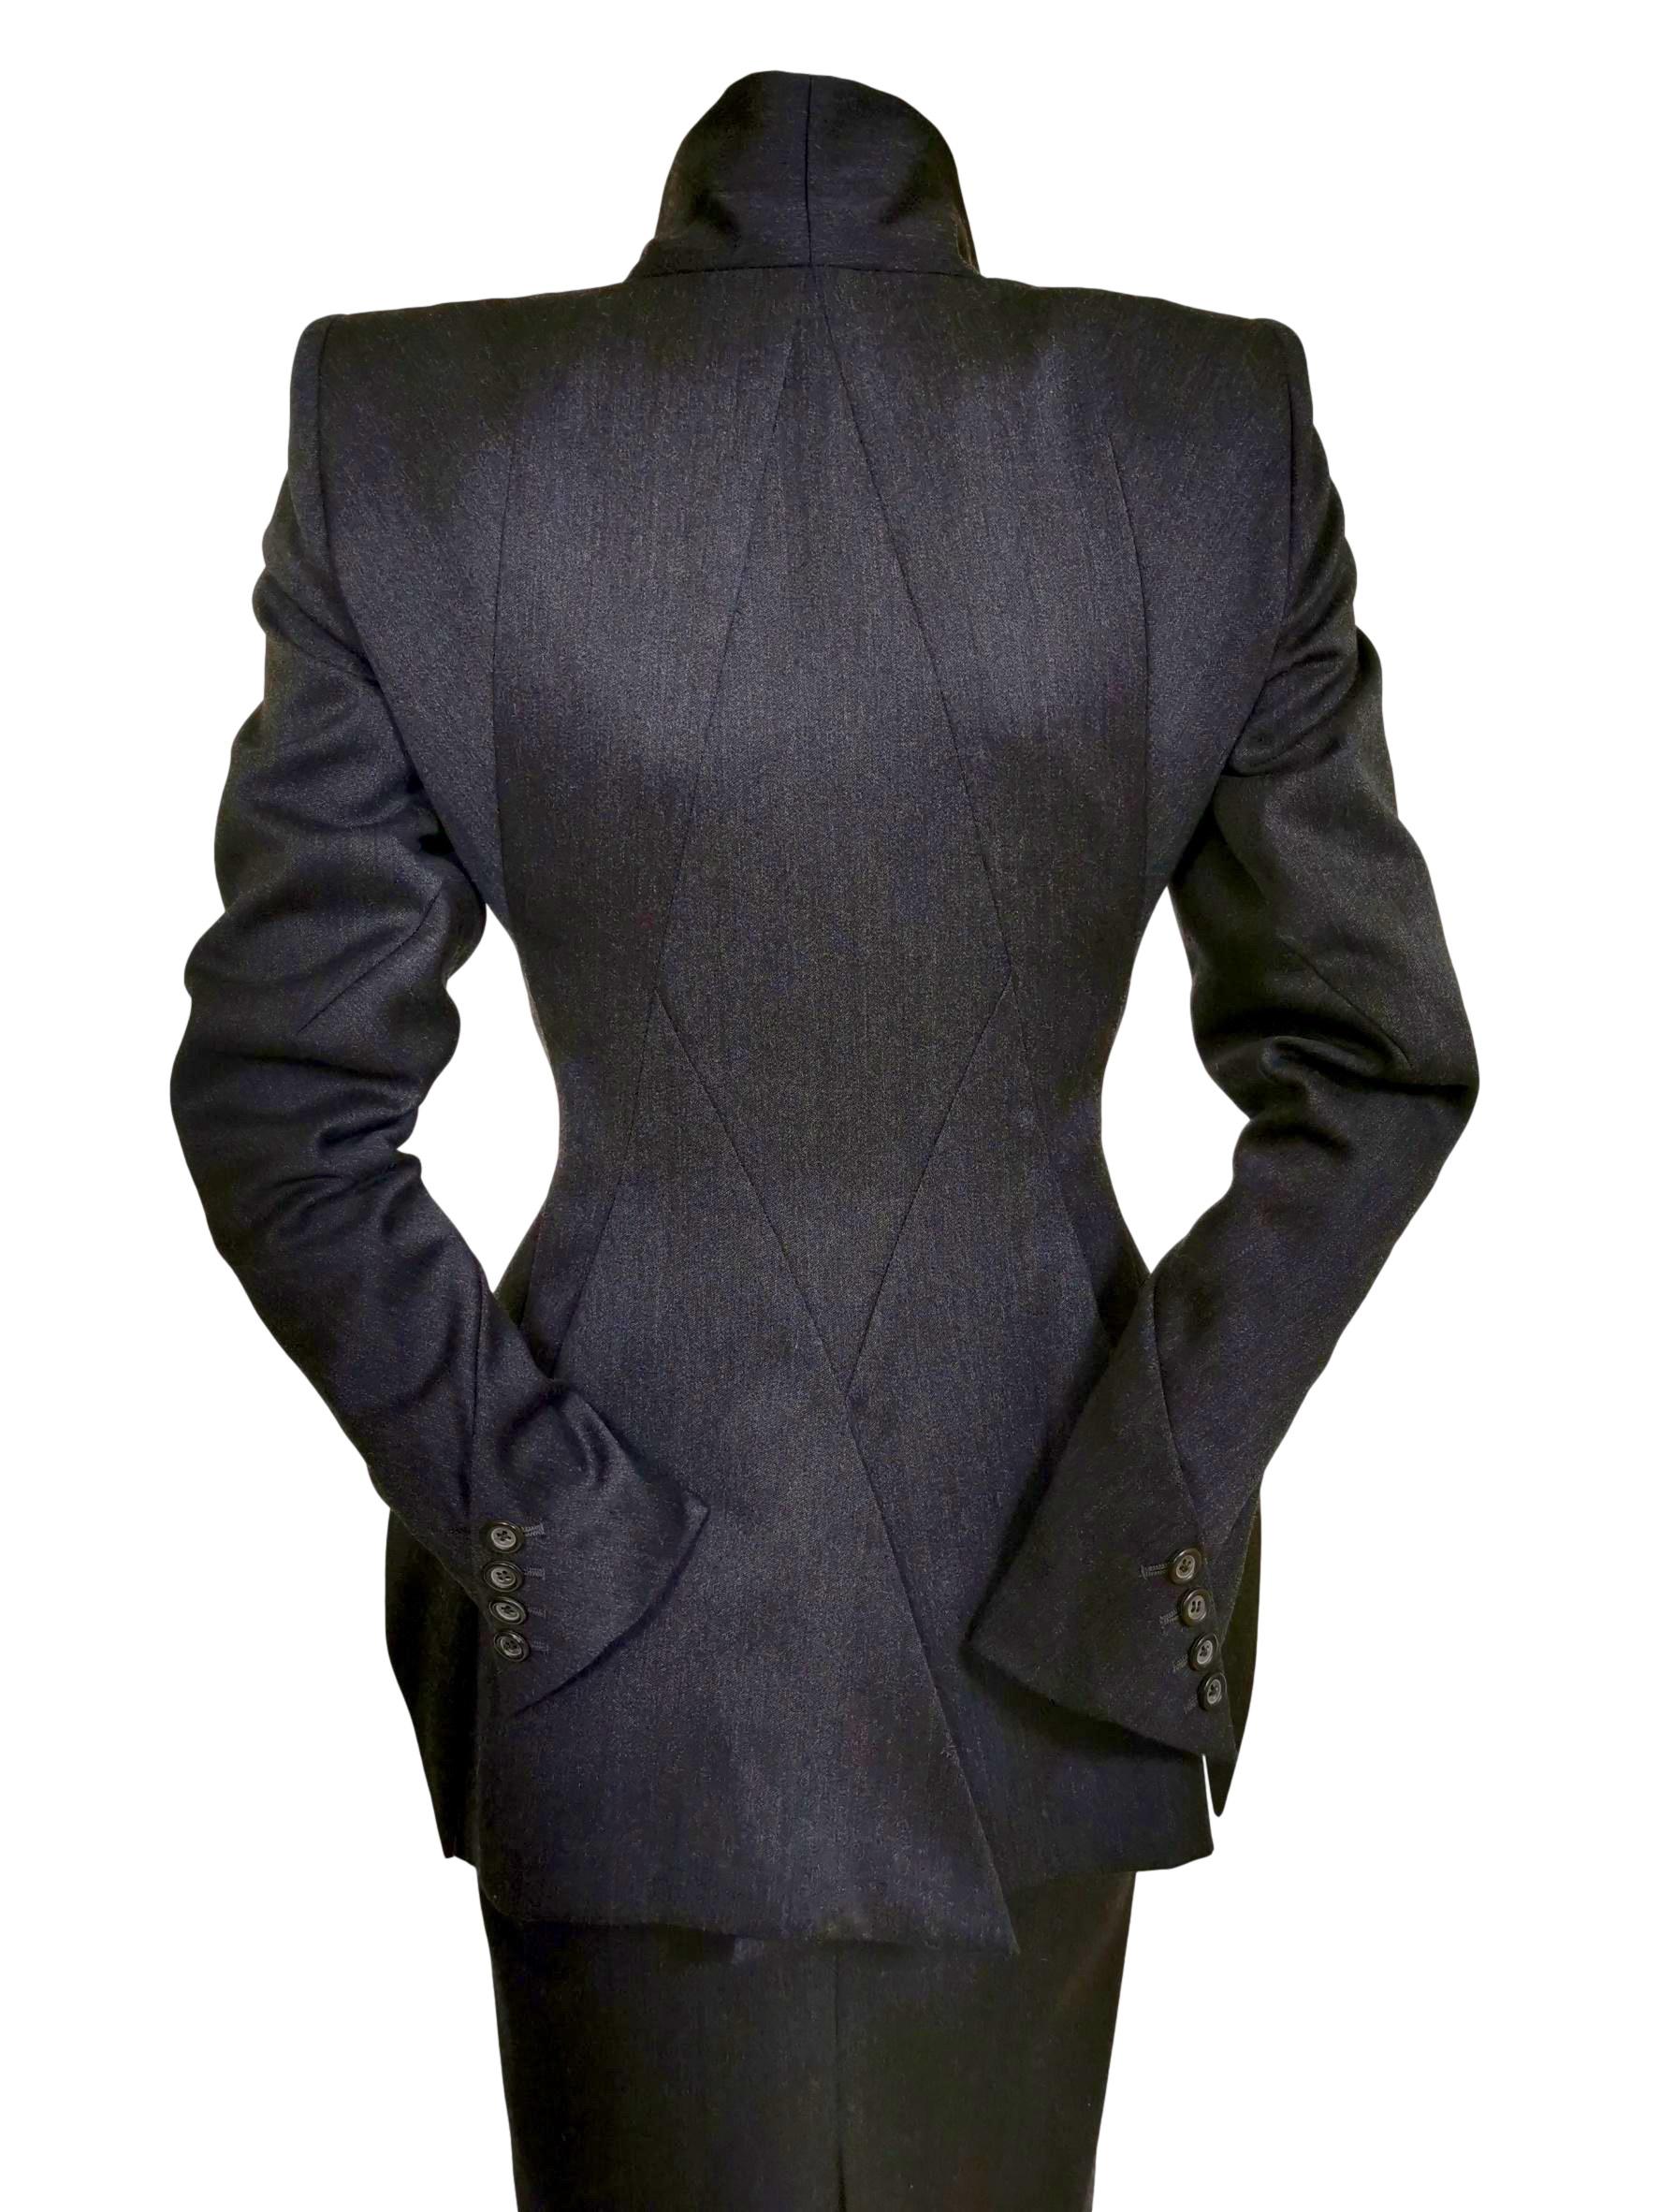 Alexander McQueen 1998 Joan Collection Fitted Skirt Suit 1